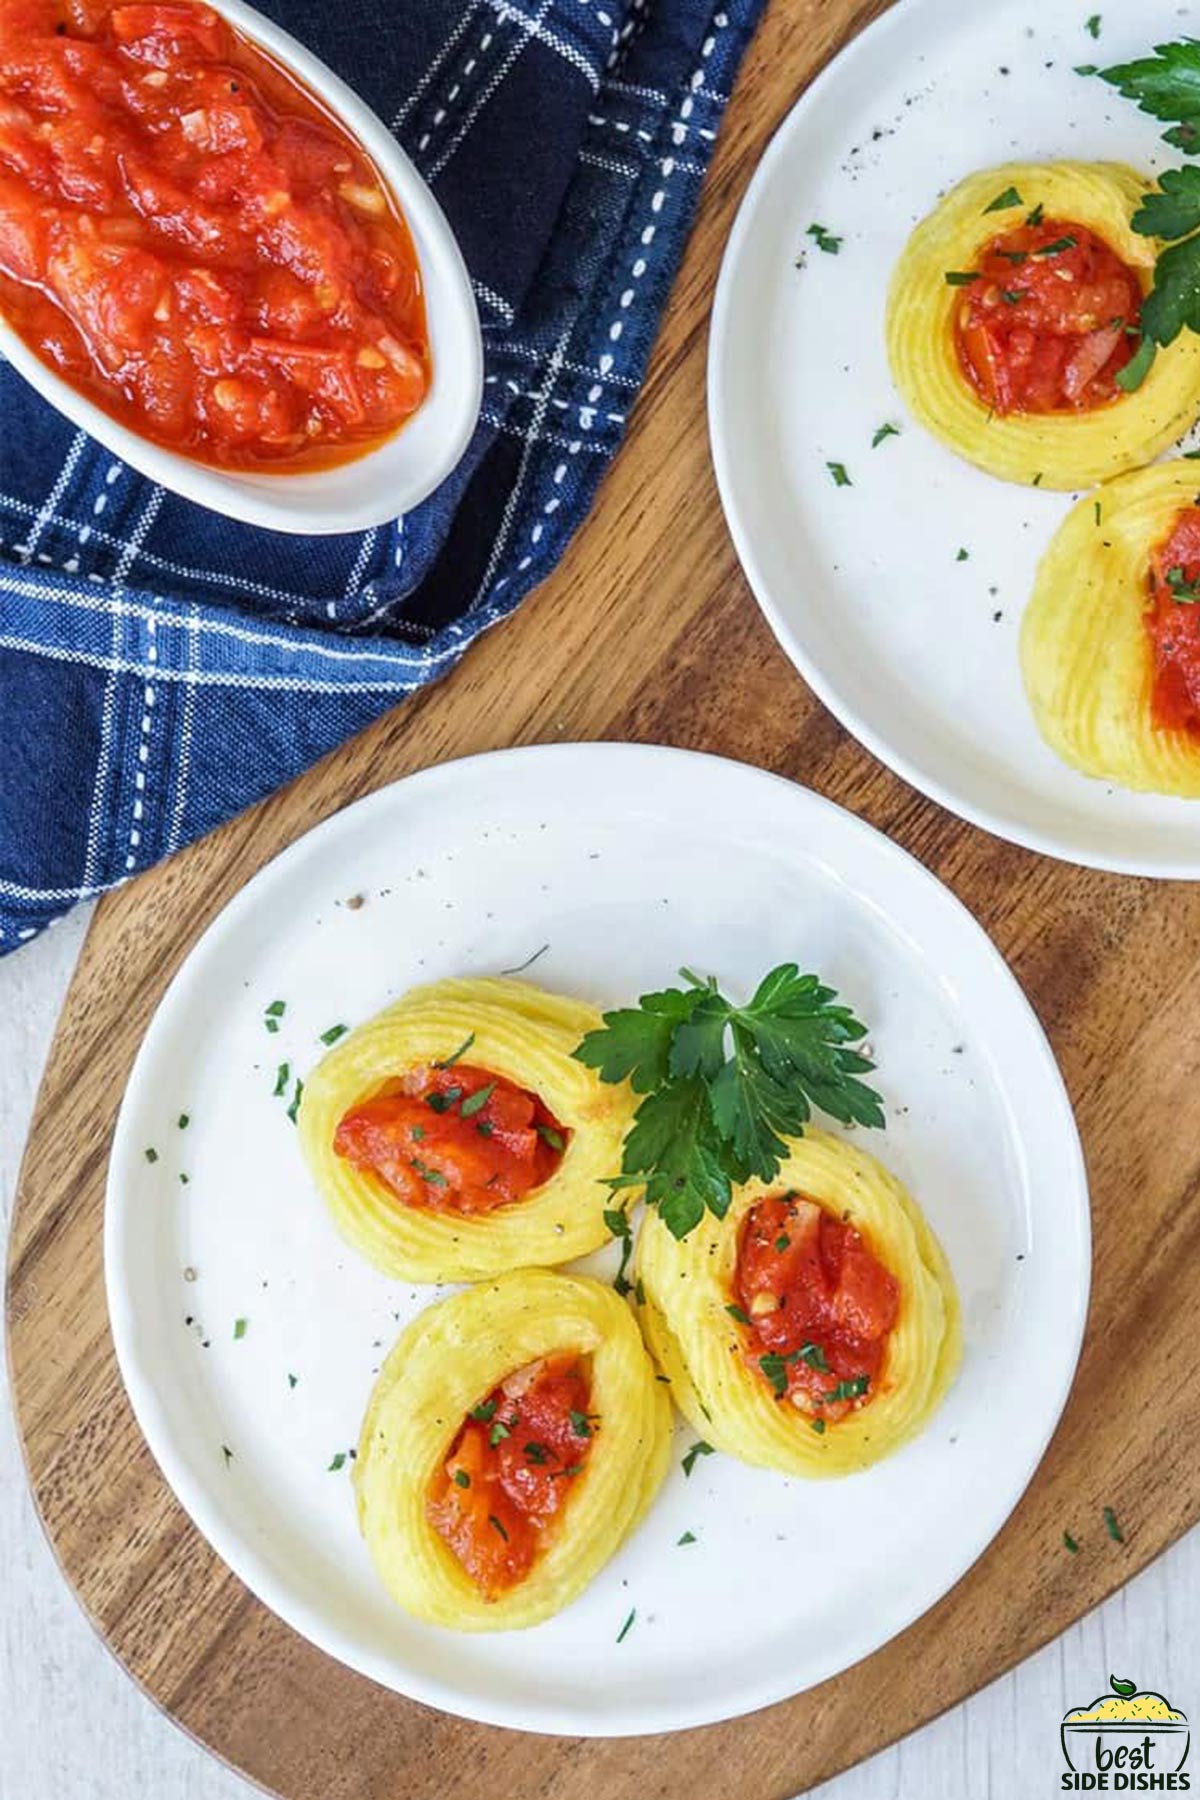 duchess potatoes on two plates with tomato sauce in a bowl